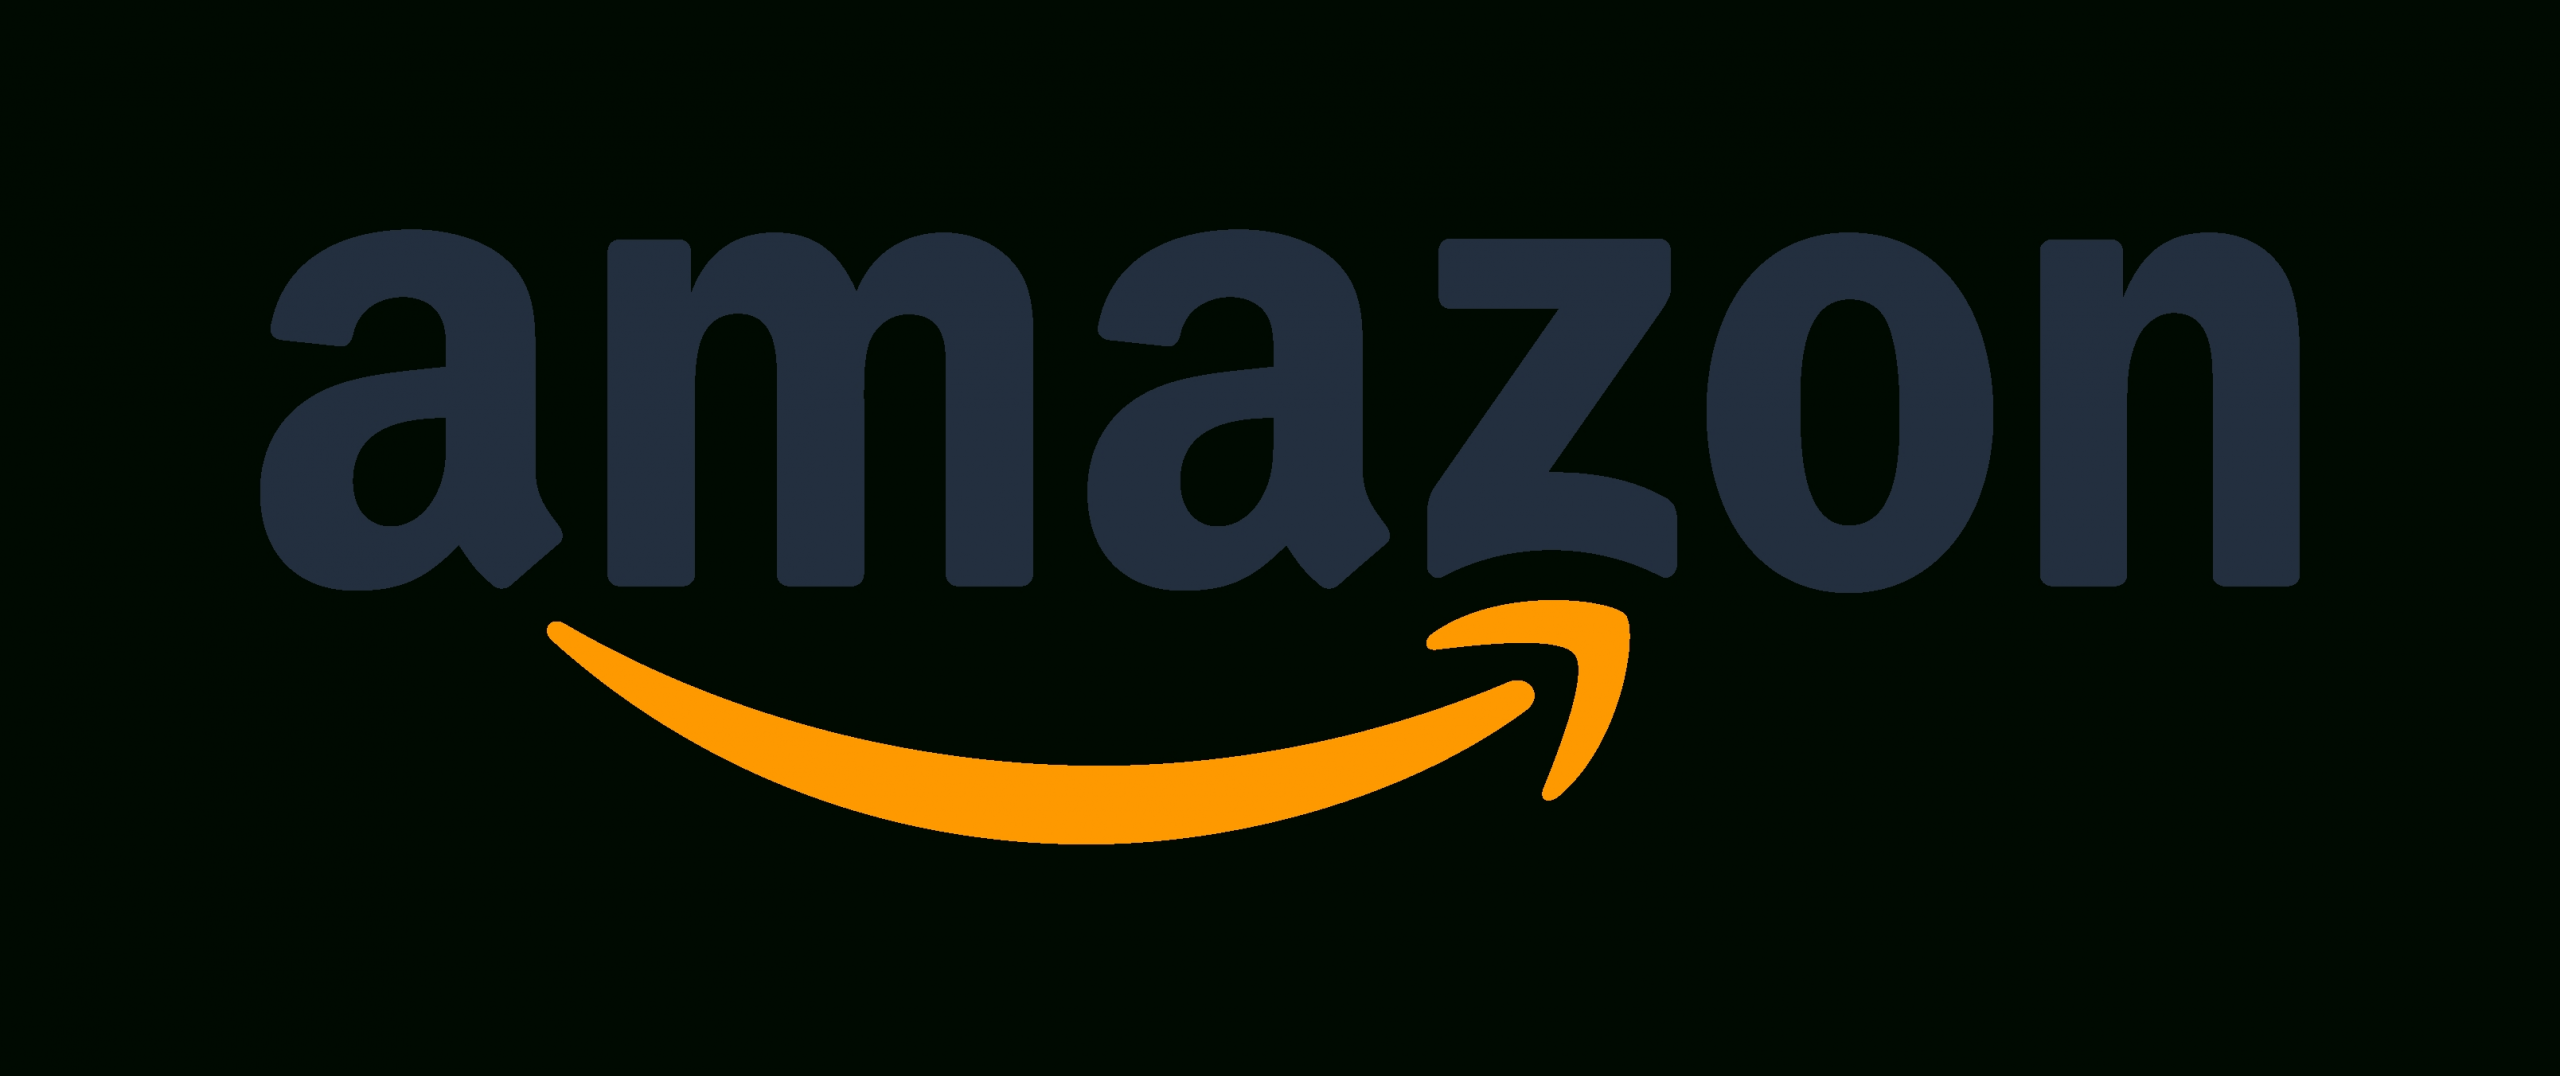 Images And Videos | Amazon, Inc Press Room